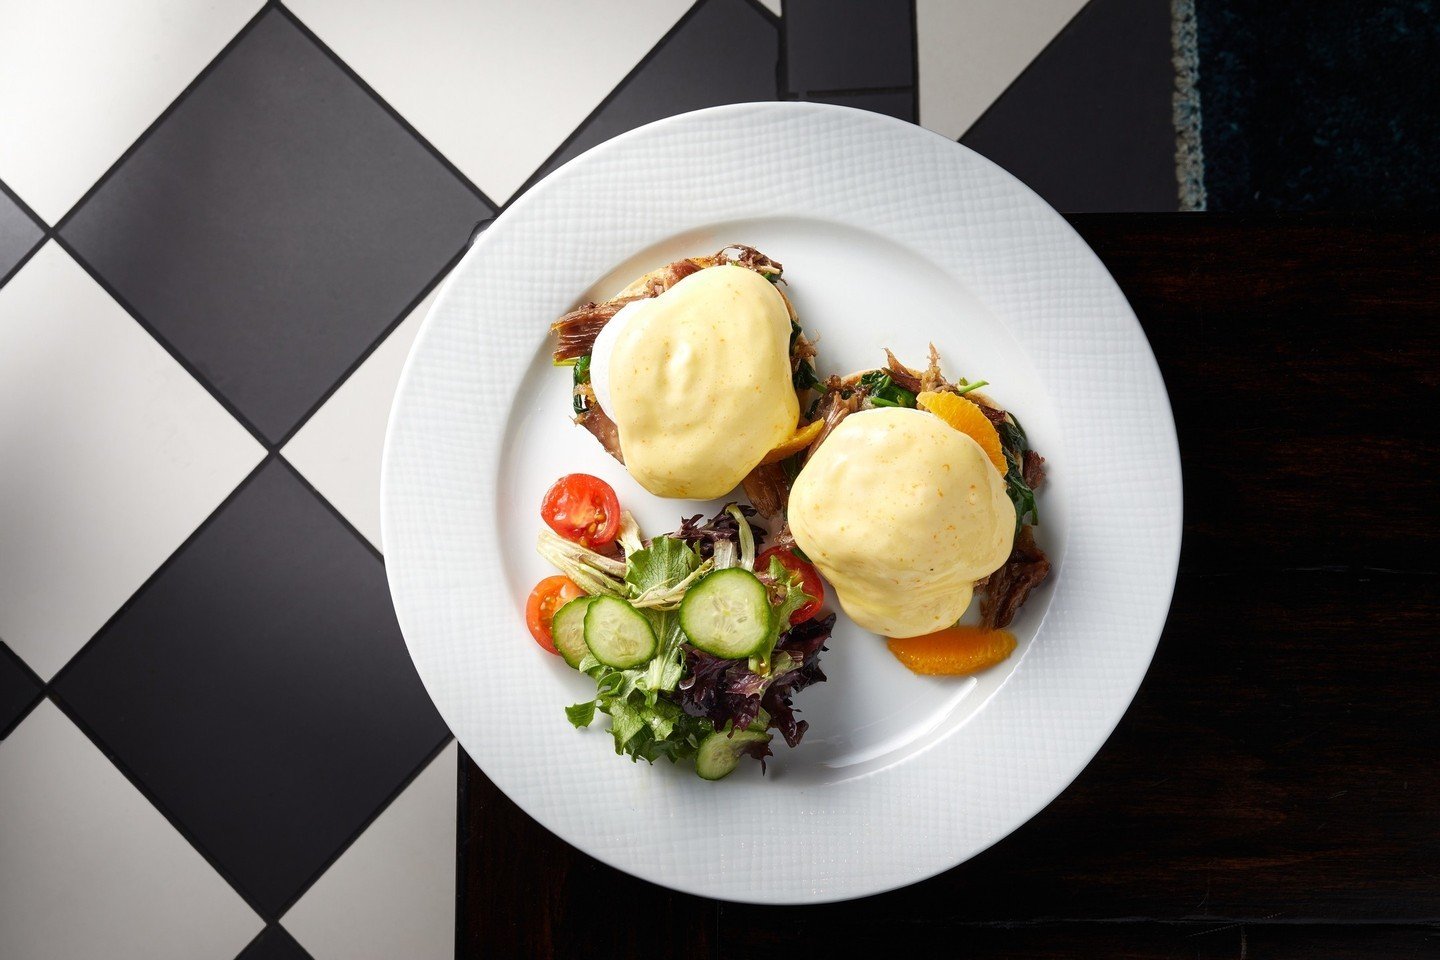 Bon app&eacute;tit to #NationalEggsBenedictDay, full flavored with confit pork shoulder and creole mustard hollandaise! 🍳⁠